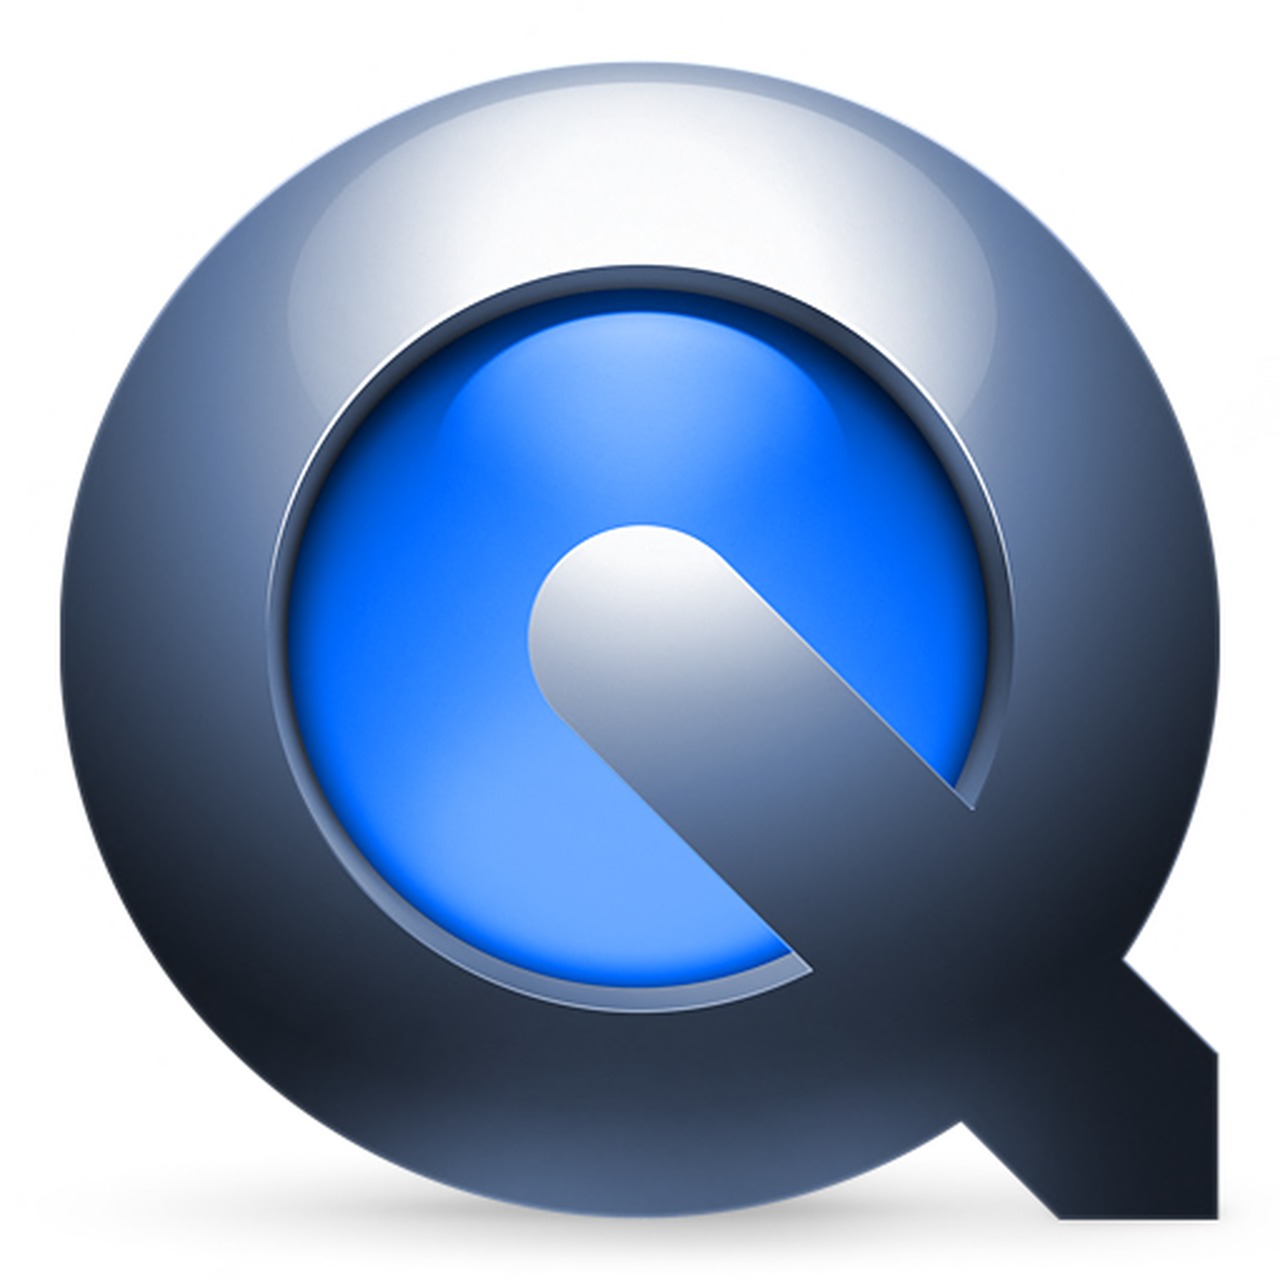 download the new version for apple Quick CPU 4.8.0